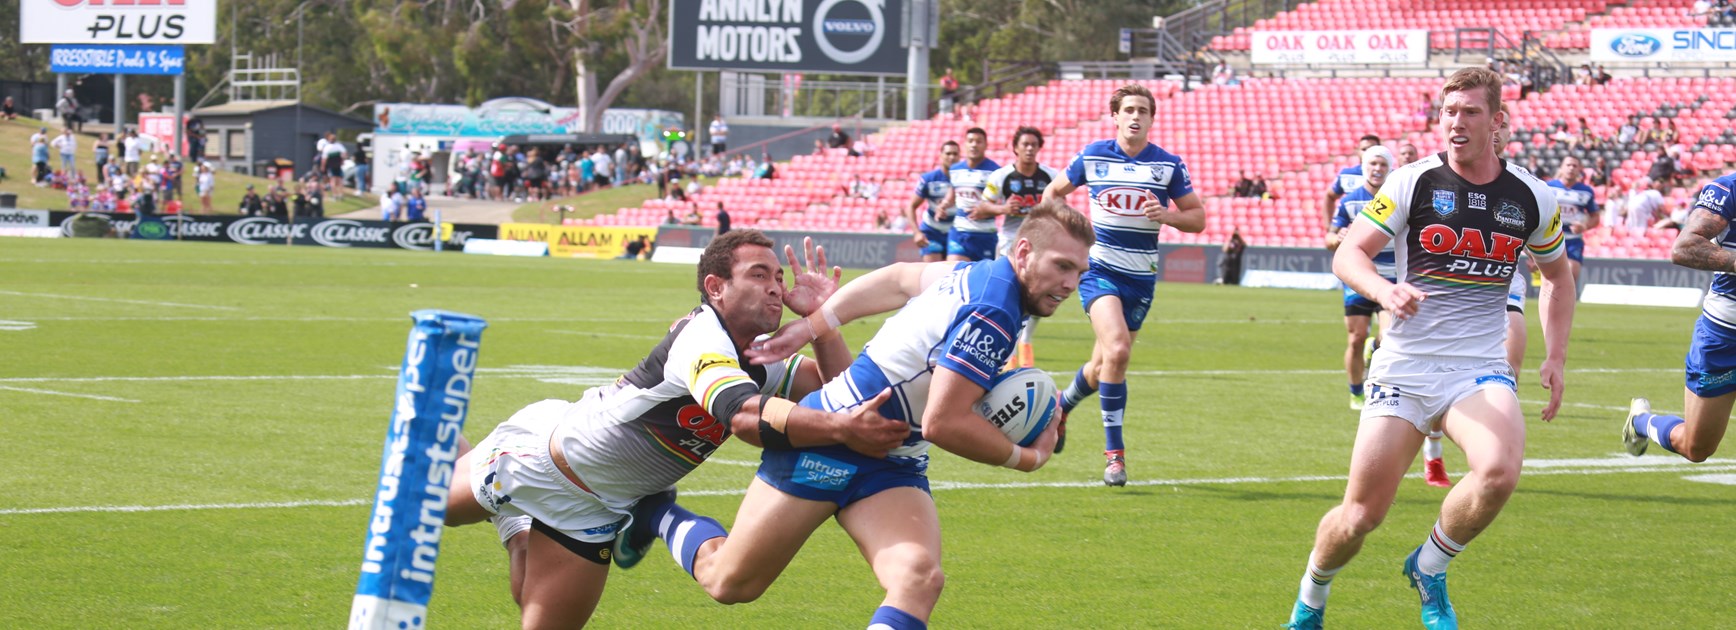 ISP LATE MAIL v Panthers